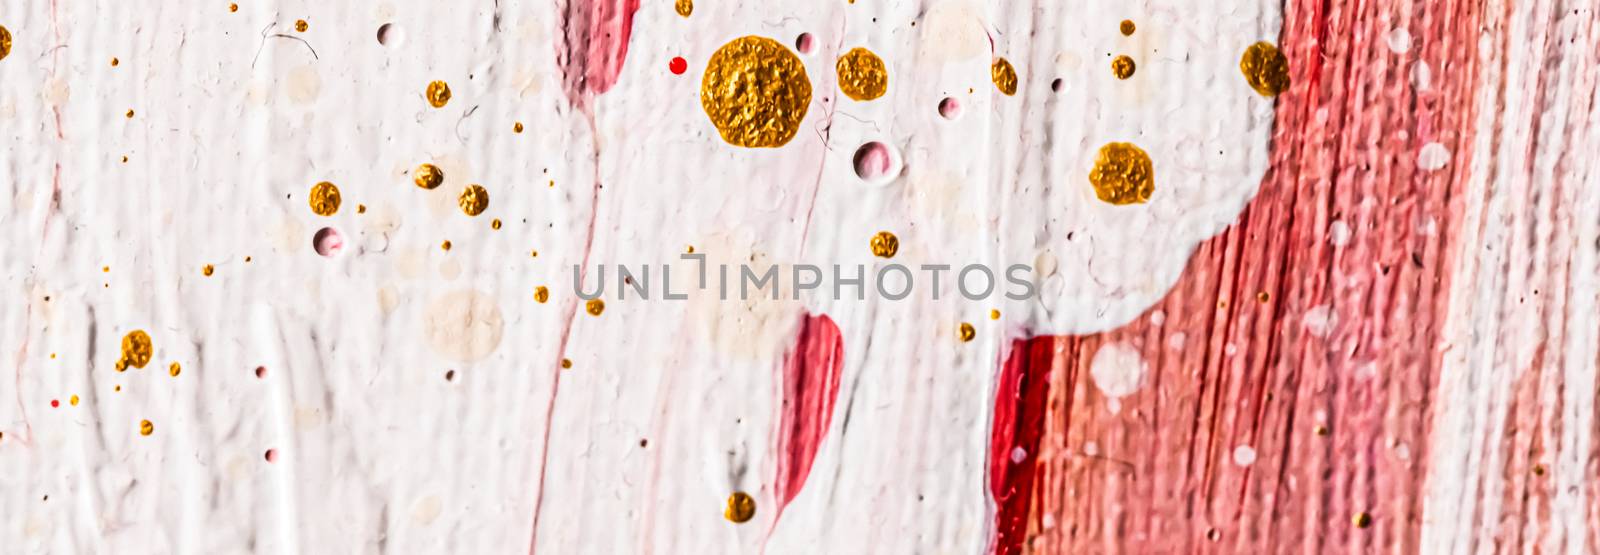 Artistic brush strokes and paint splashes as abstract art and minimalistic background, contemporary design and modern branding backdrop